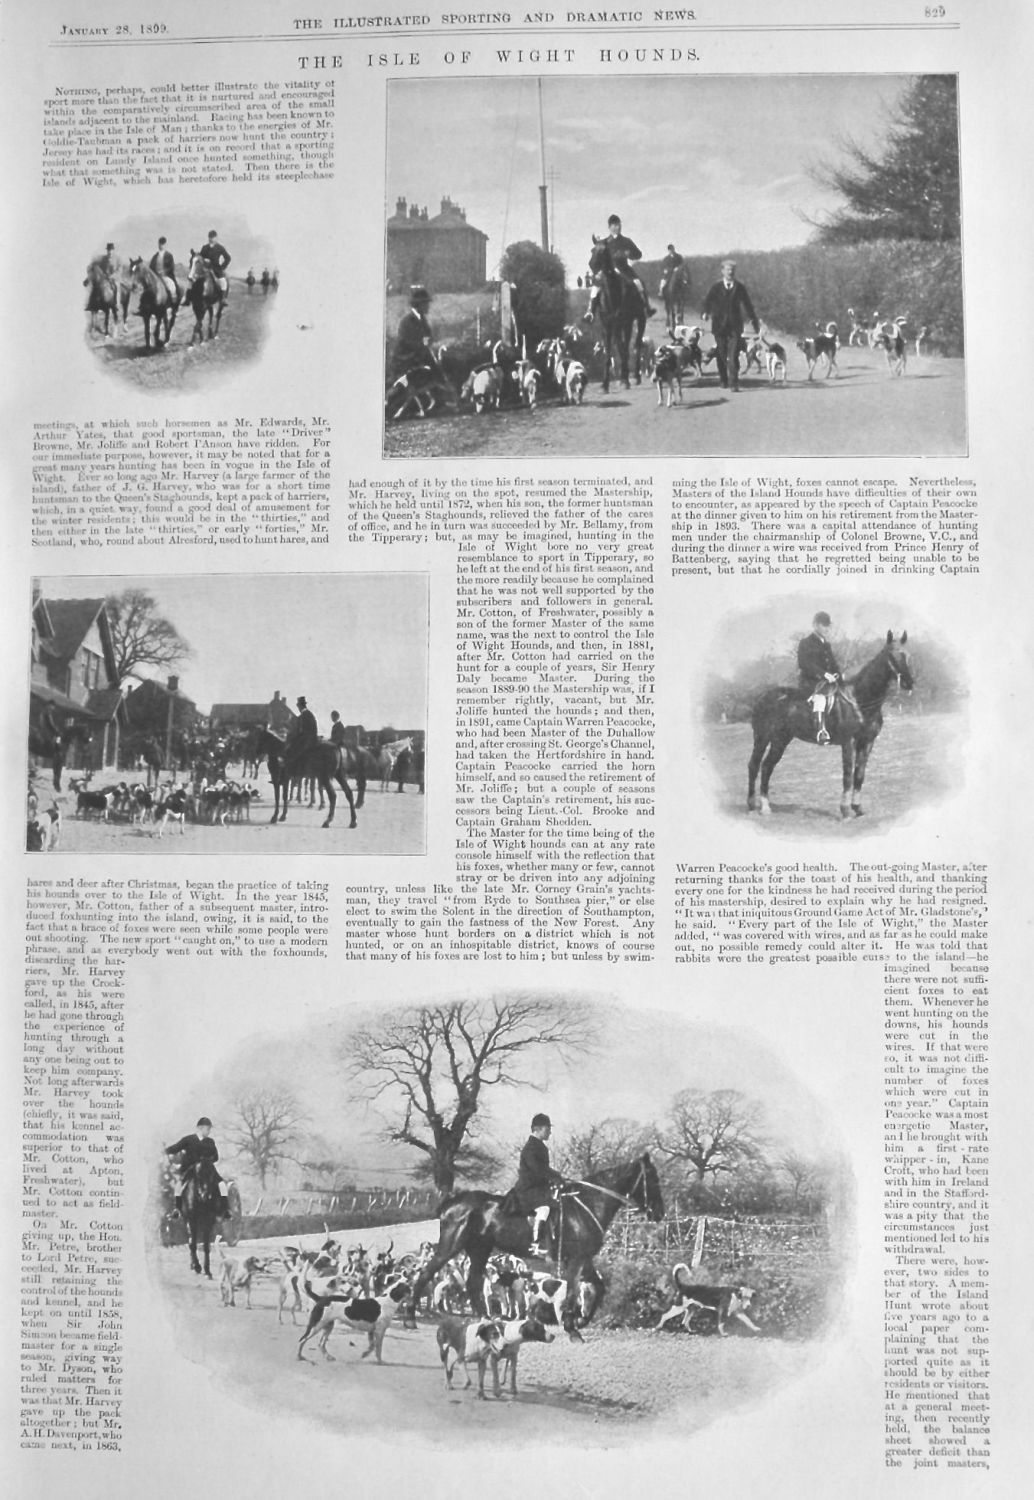 The Isle of Wight Hounds.  1899.